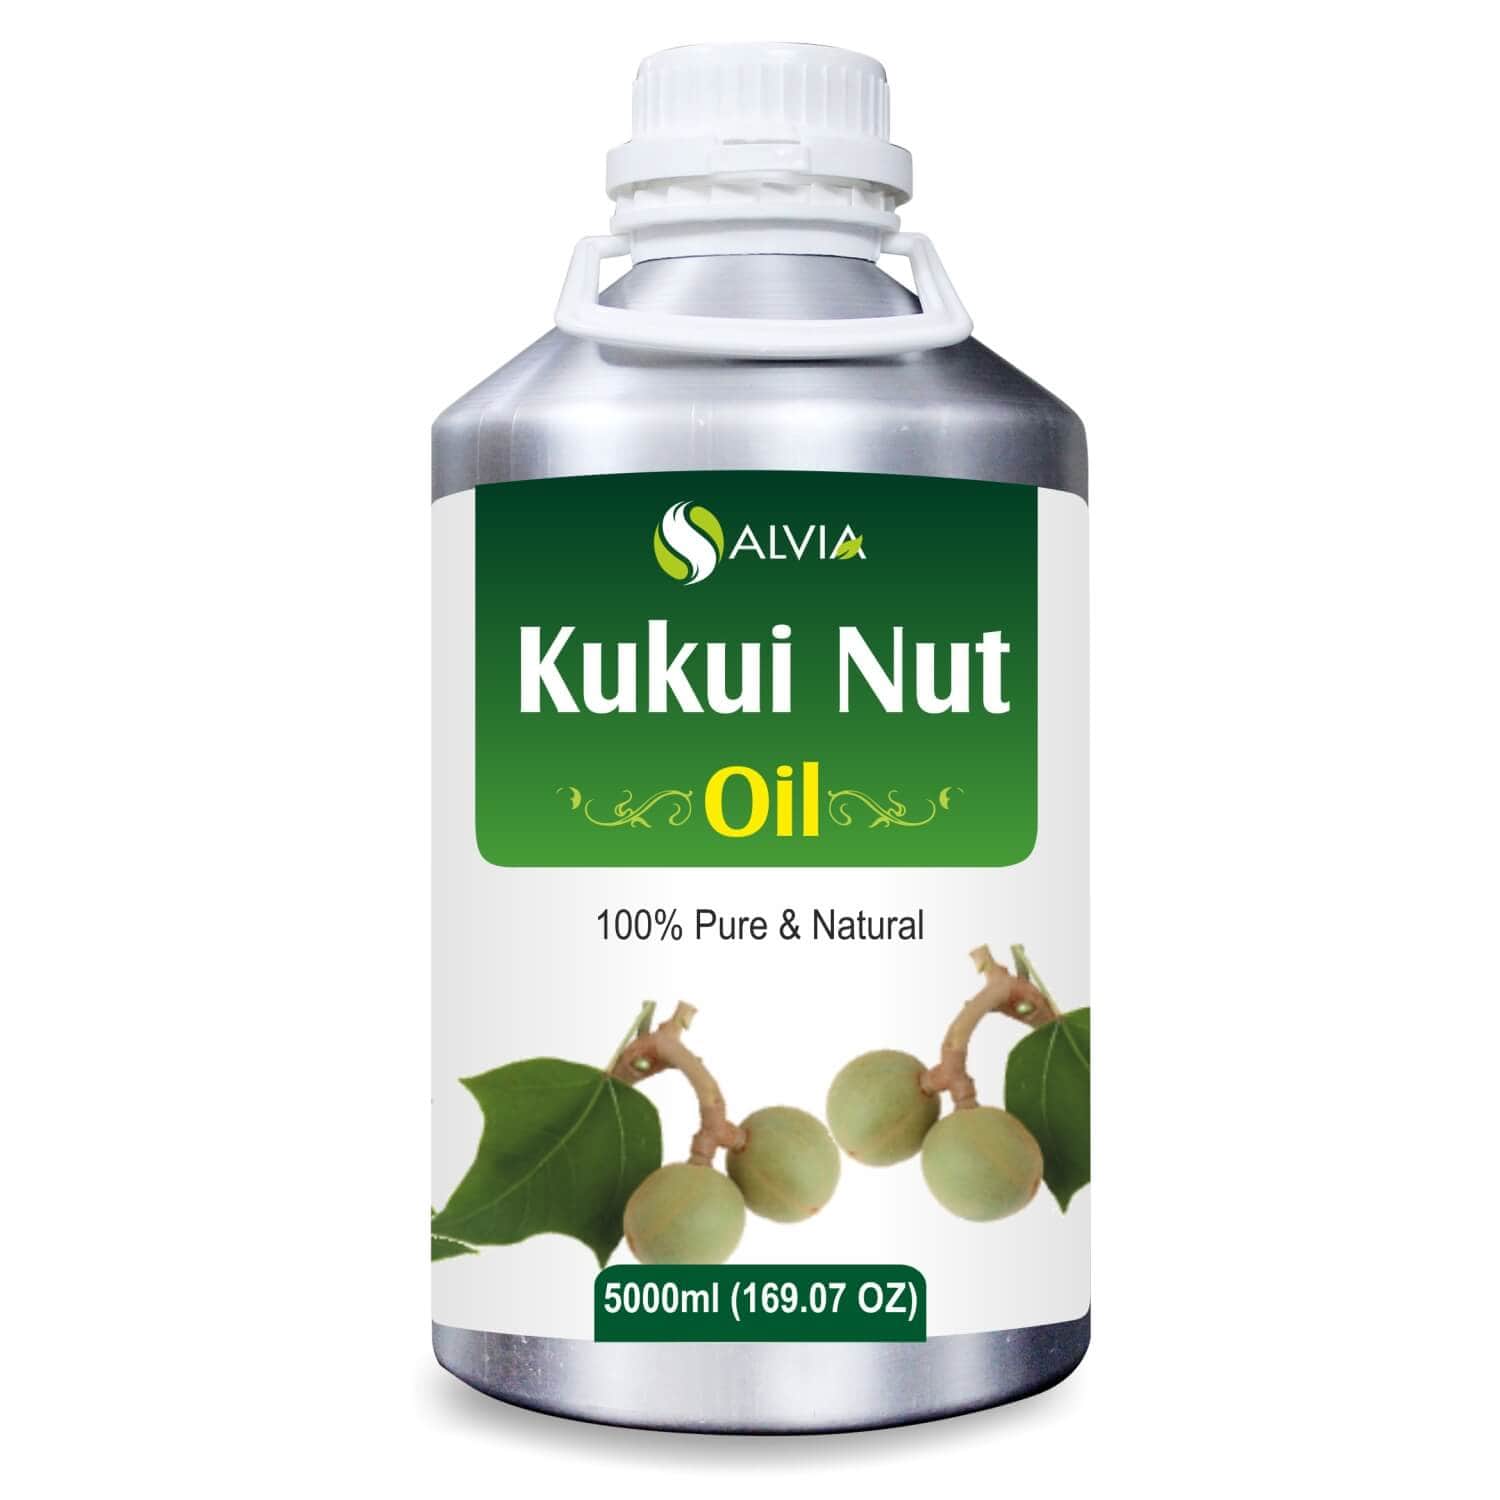 Salvia Natural Carrier Oils,Anti Ageing,Anti-ageing Oil 5000ml Kukui Nut (Aleurites Moluccans) Oil 100% Natural Pure Carrier Oil Moistures & Hydrates Skin, Anti-Aging Properties, Collagen Production & More